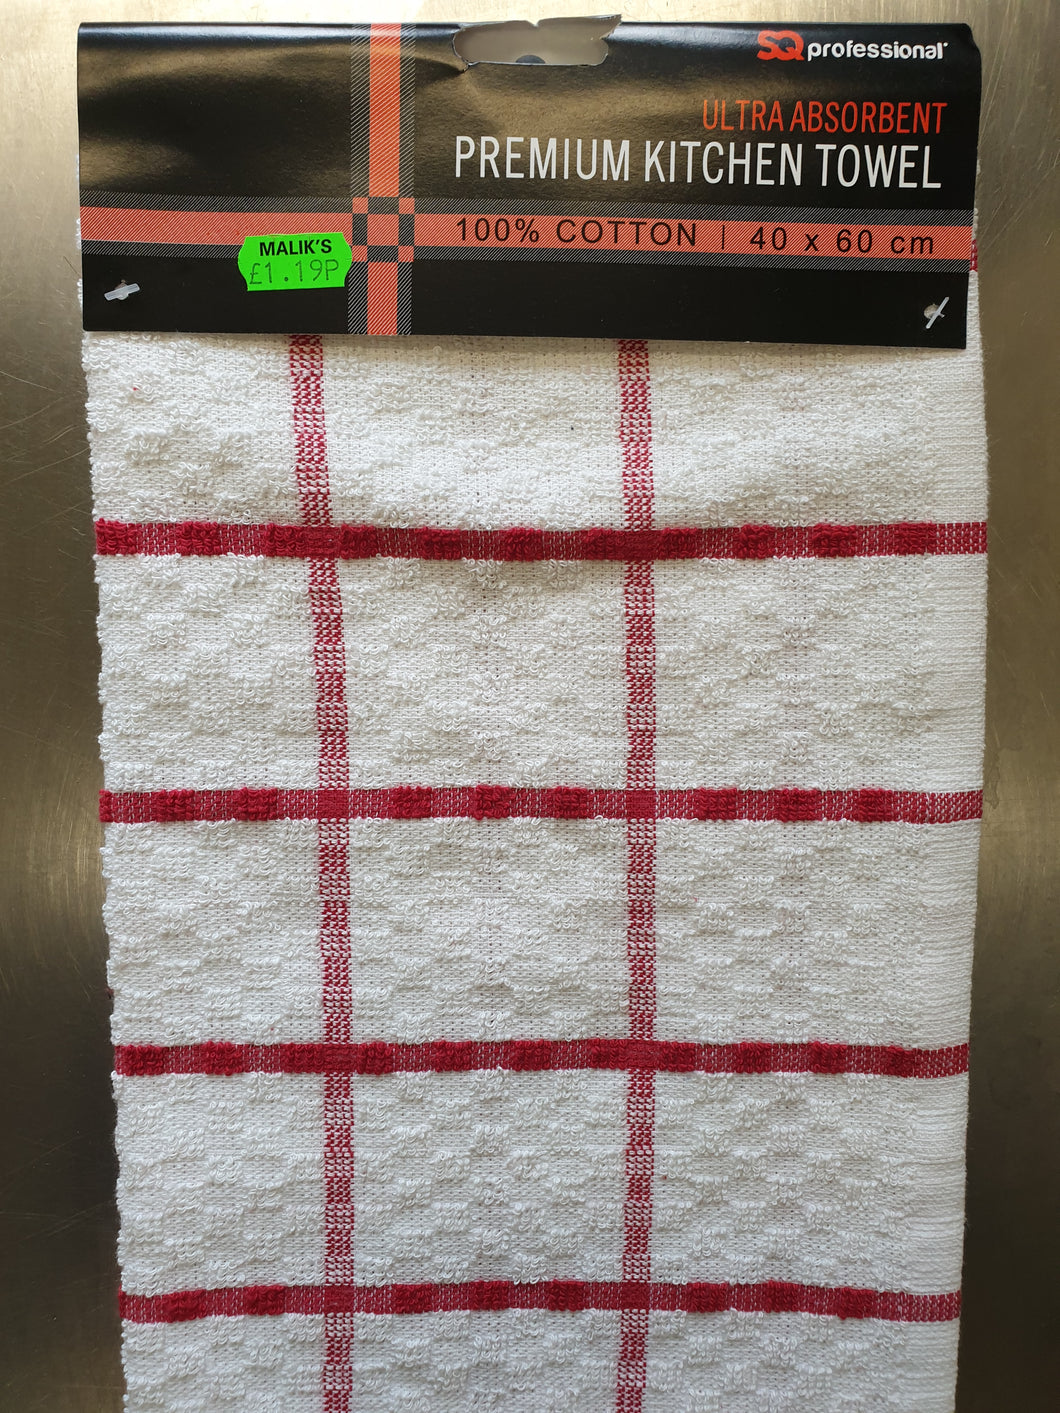 Ultra Absorbent Kitchen Towel